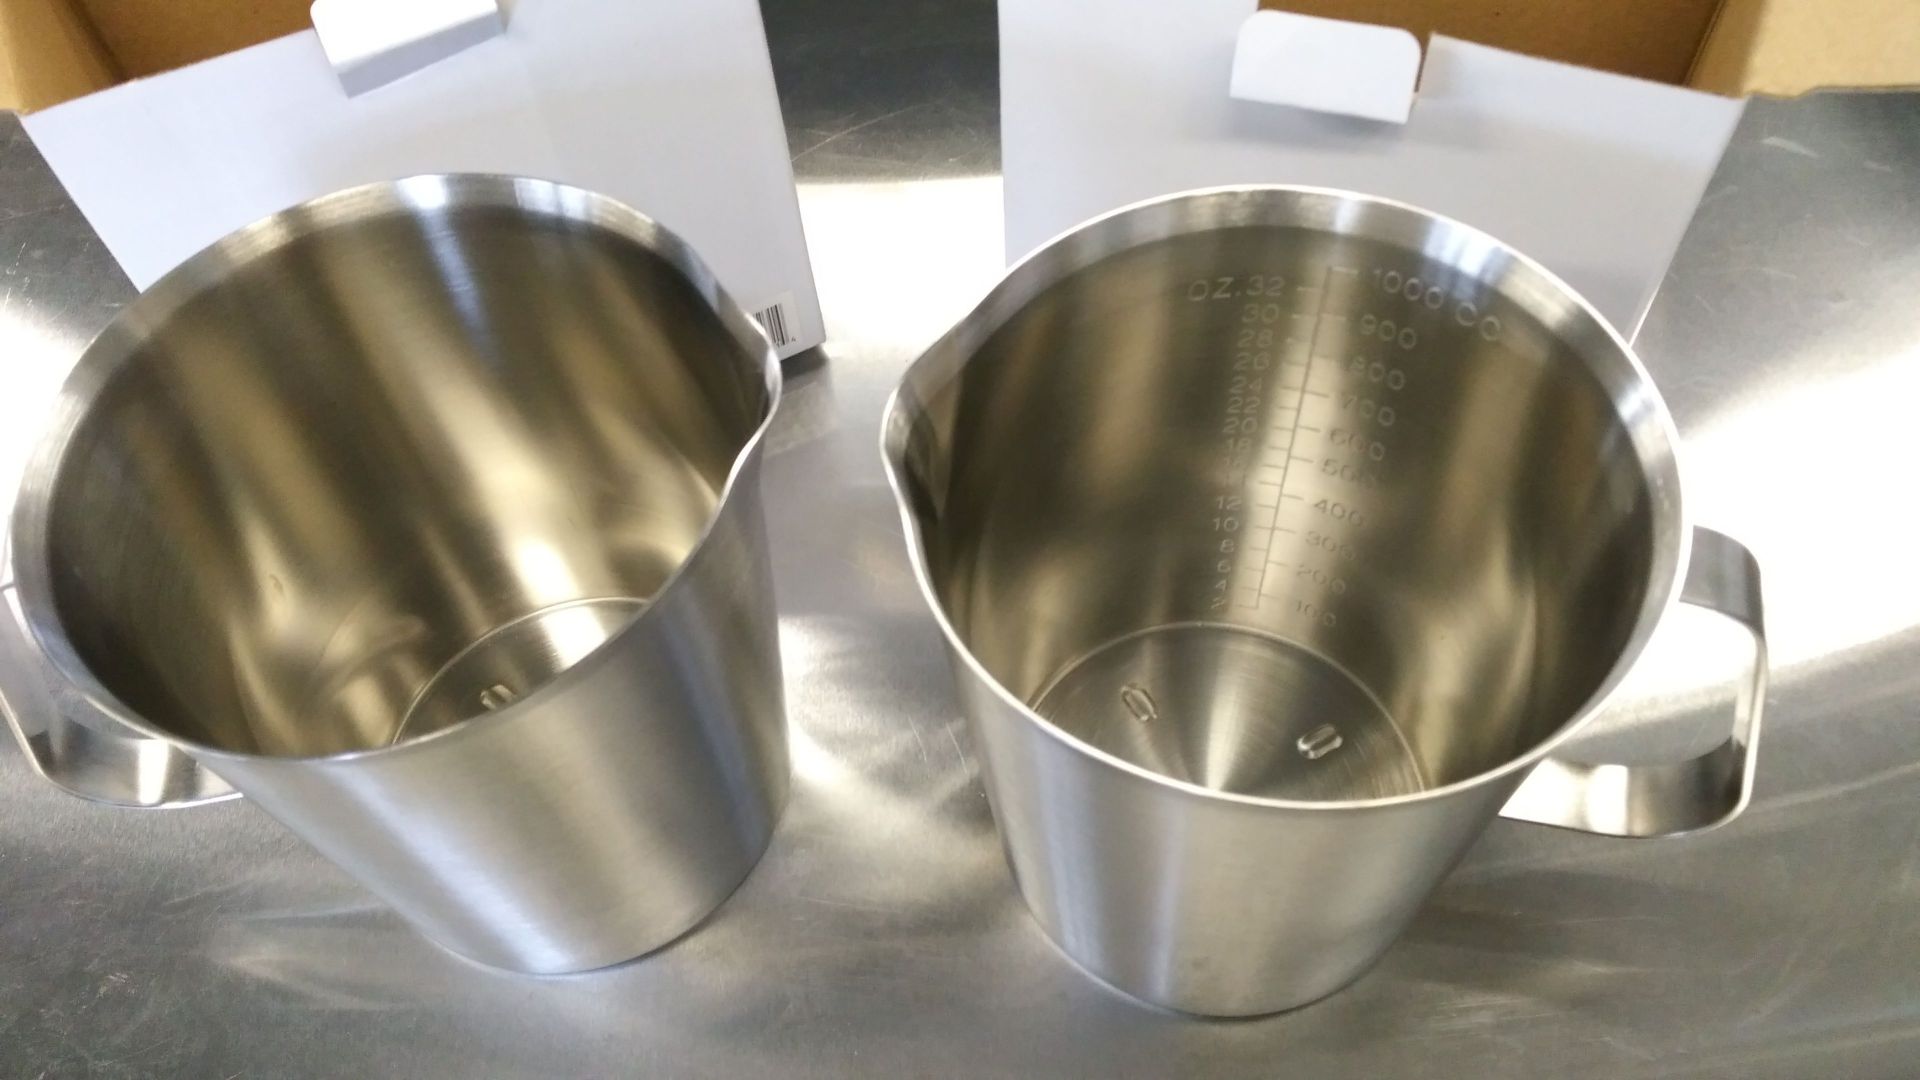 1000ml Heavy Duty Stainless Measures - Lot of 2 - Image 2 of 3